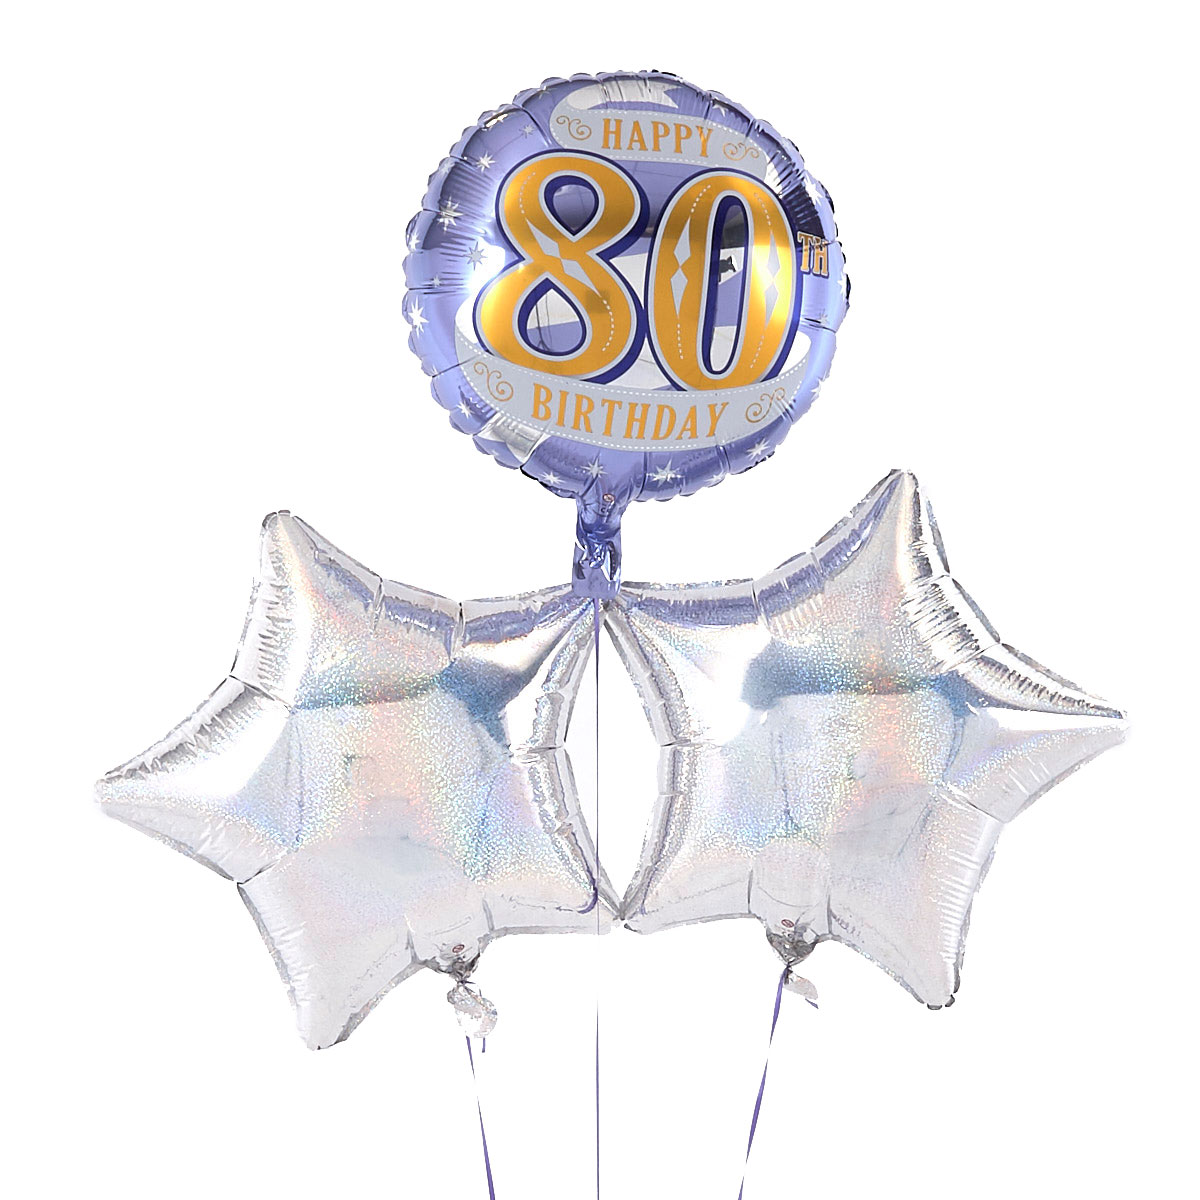 80th Birthday Silver Balloon Bouquet - DELIVERED INFLATED!